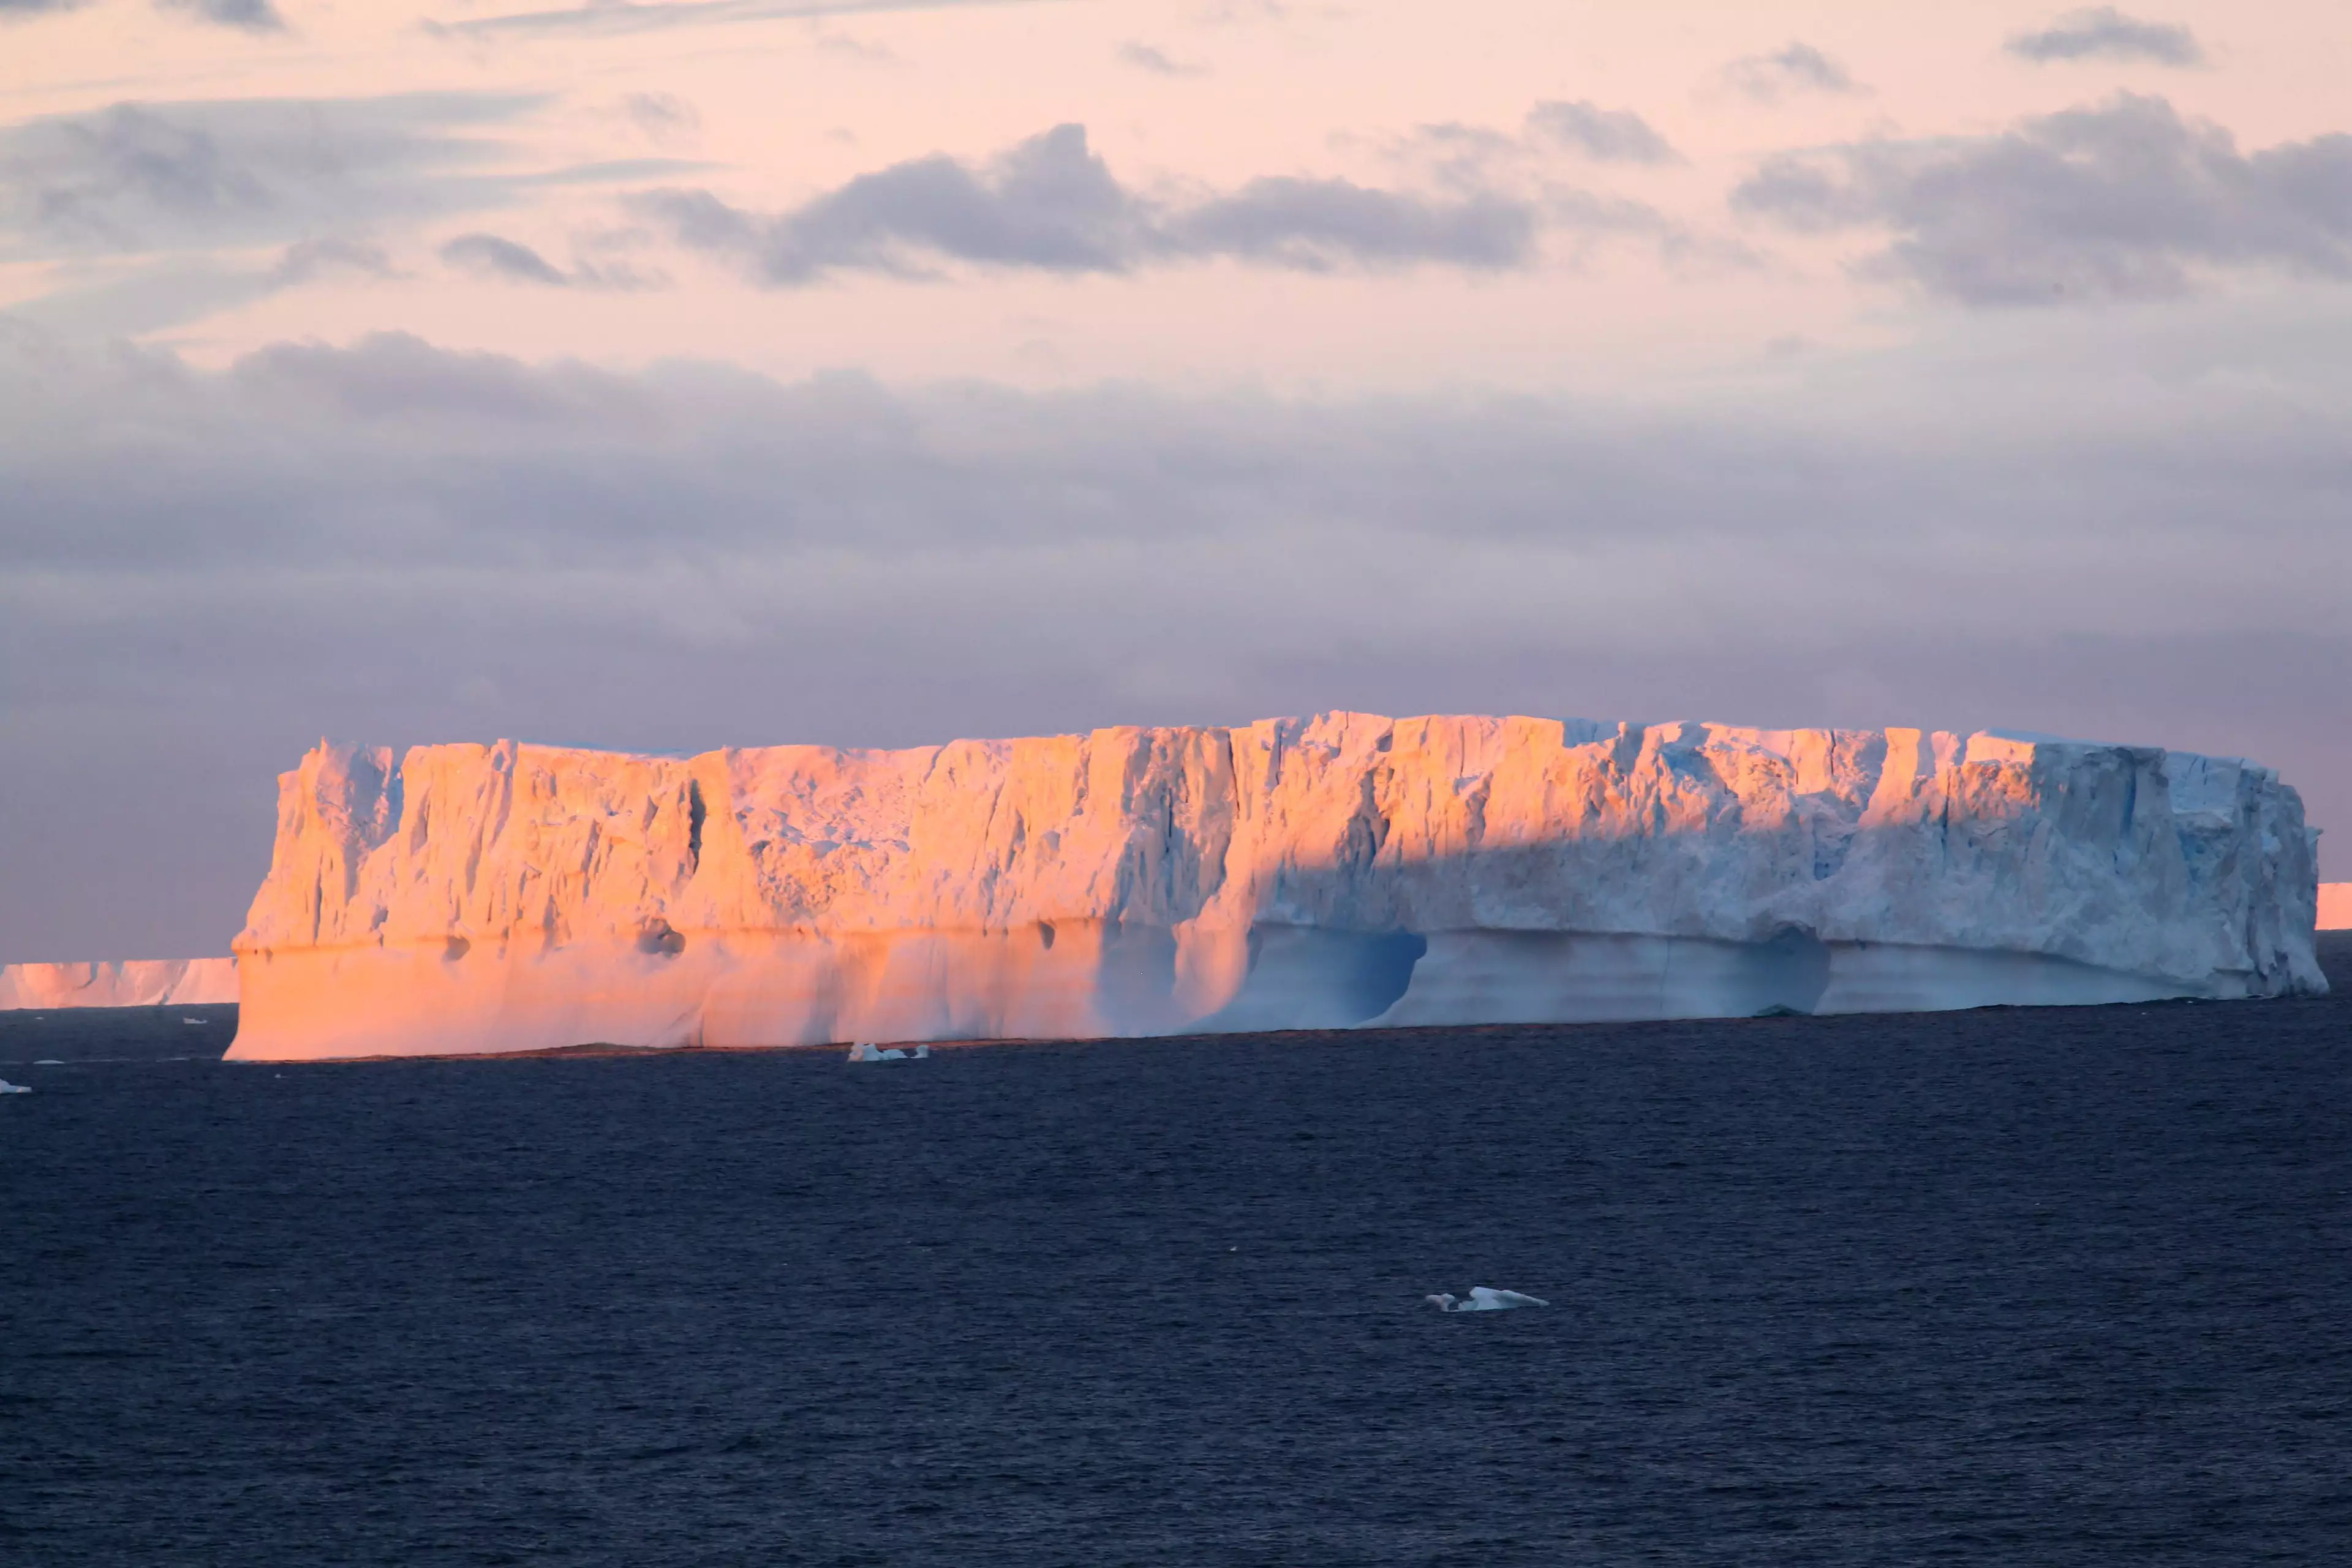 Some effects, such as the melting of ice sheets in Antarctica, will take longer to see.